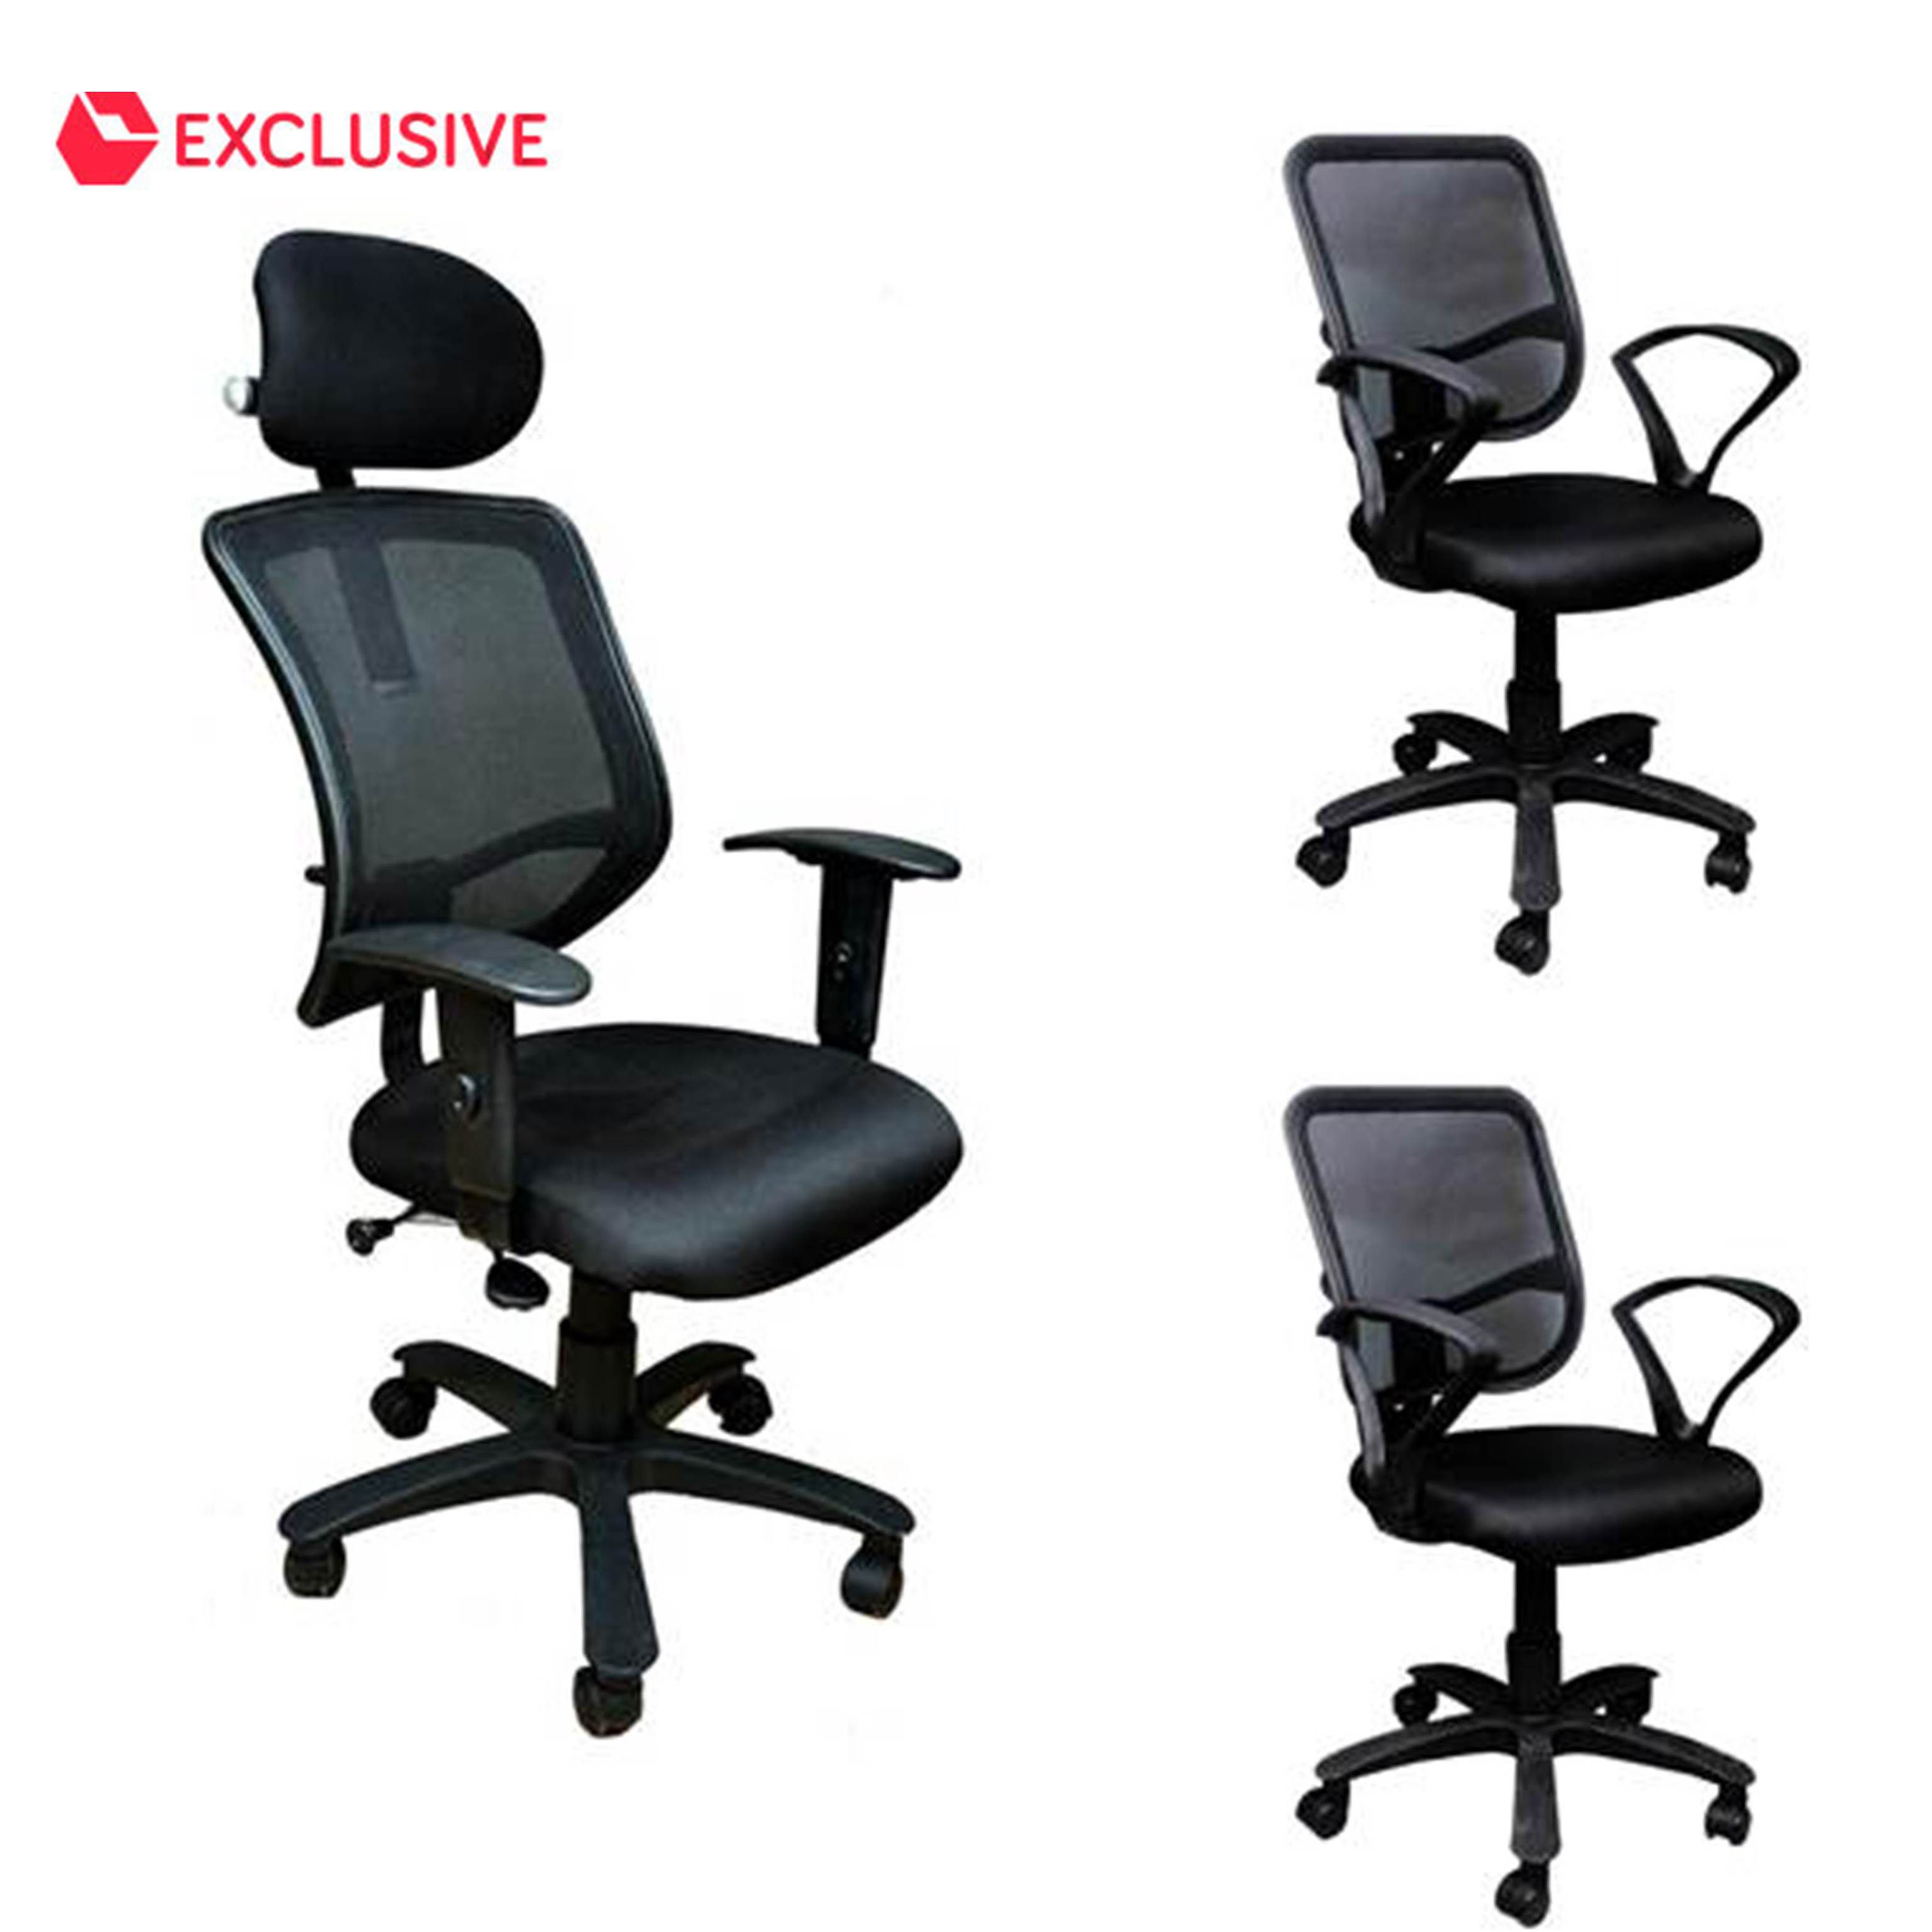 Buy 1 Executive Chair Get 2 Office Chairs Free - Buy Buy 1 Executive